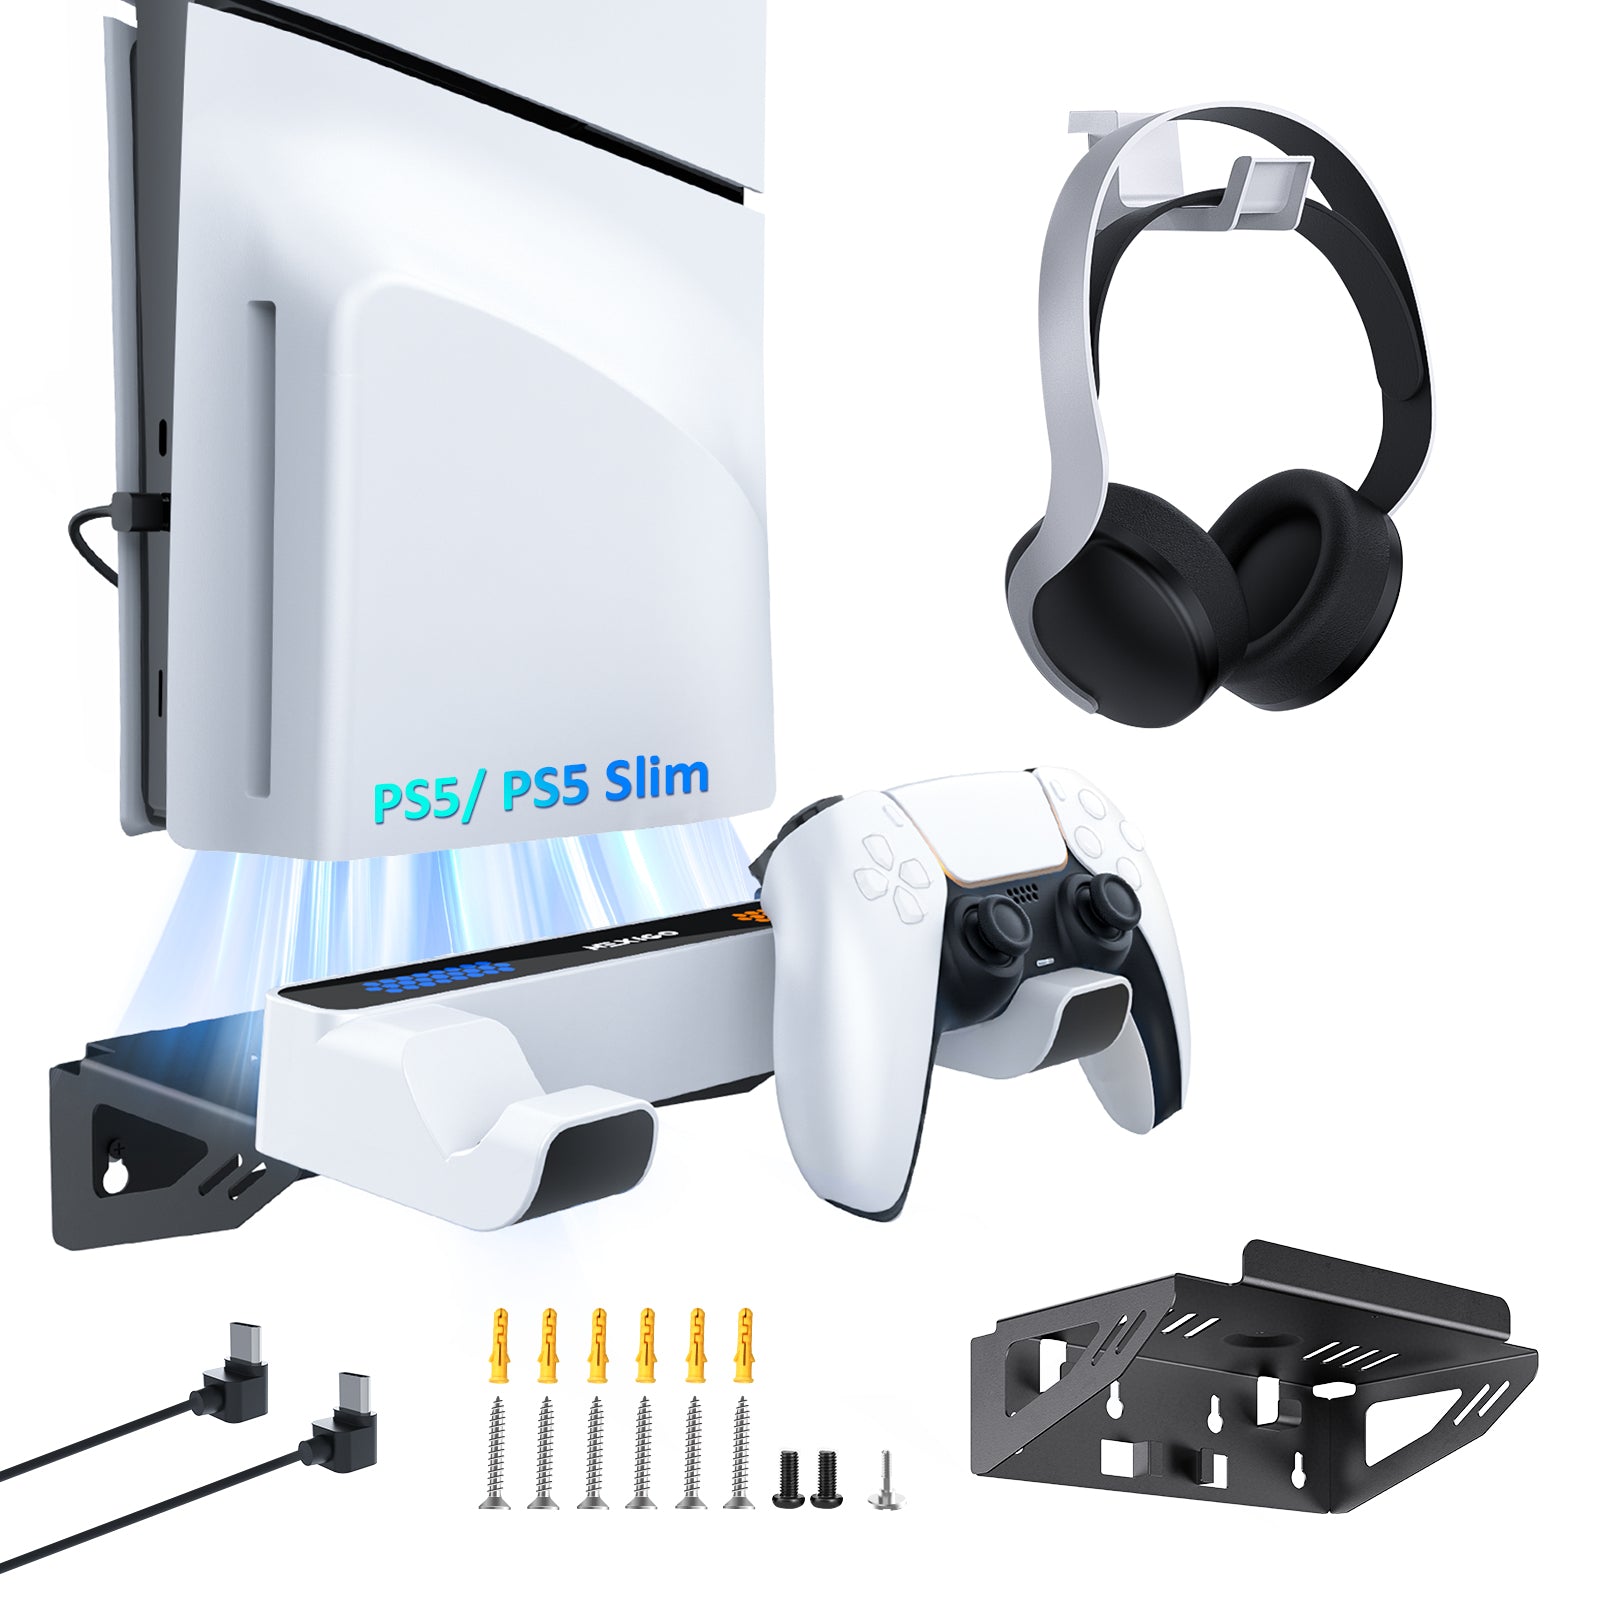 NexiGo PS5 Wall Mount Kit with Charging Station for Both PS5 and New PS5 Slim Consoles